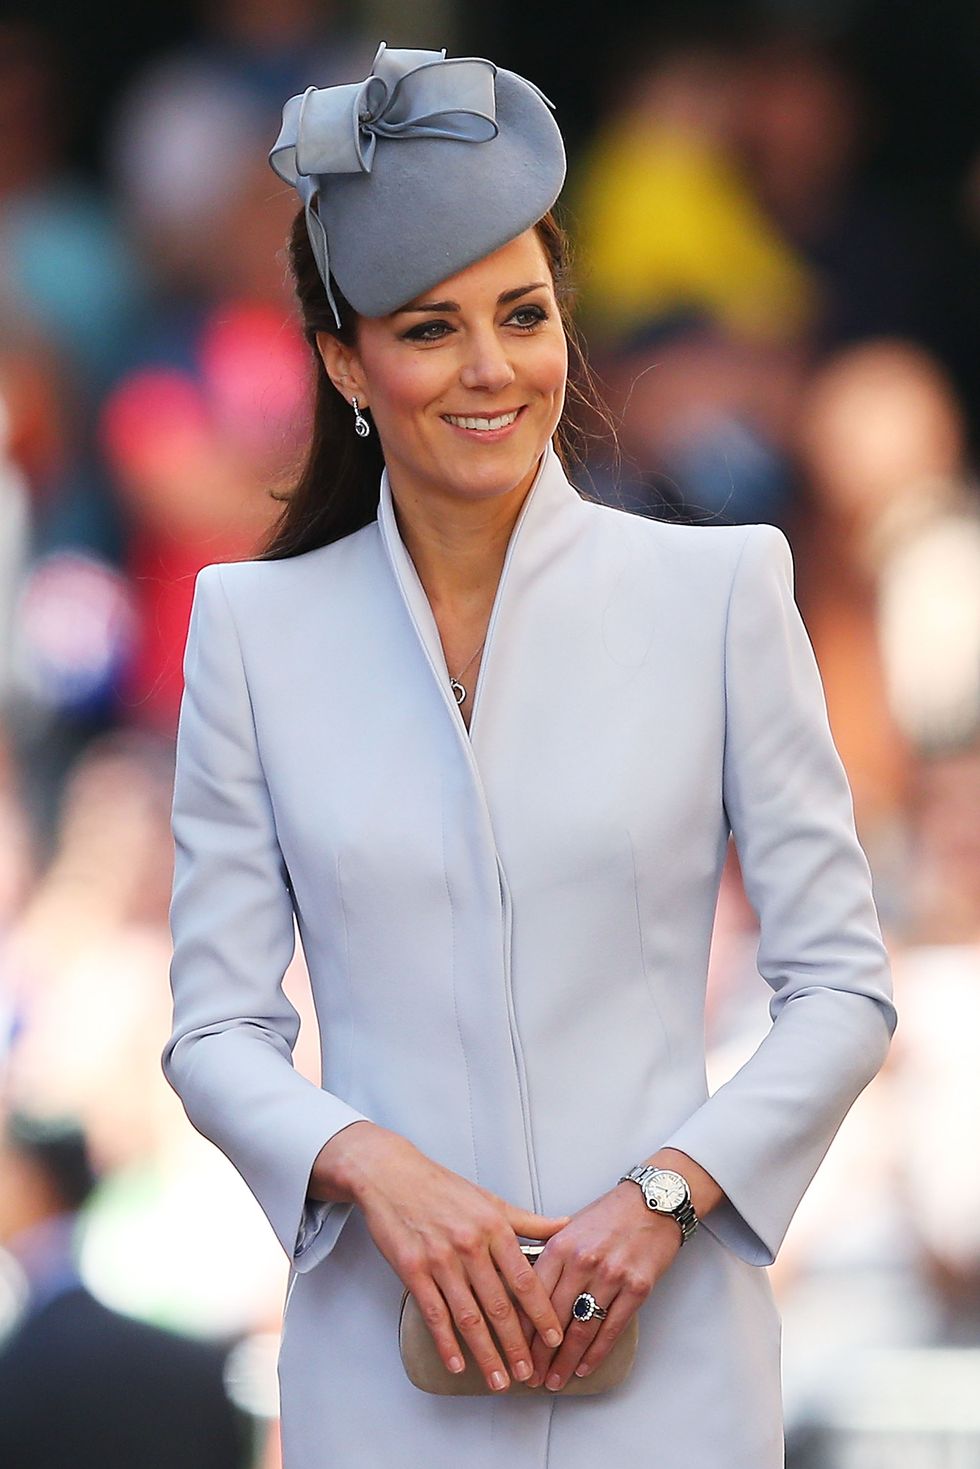 SYDNEY, AUSTRALIA - APRIL 20:  Catherine, Duchess of Cambridge arrives at St Andrew's Cathedral for Easter Sunday Service on April 20, 2014 in Sydney, Australia. The Duke and Duchess of Cambridge are on a three-week tour of Australia and New Zealand, the first official trip overseas with their son, Prince George of Cambridge.  (Photo by Brendon Thorne/Getty Images)